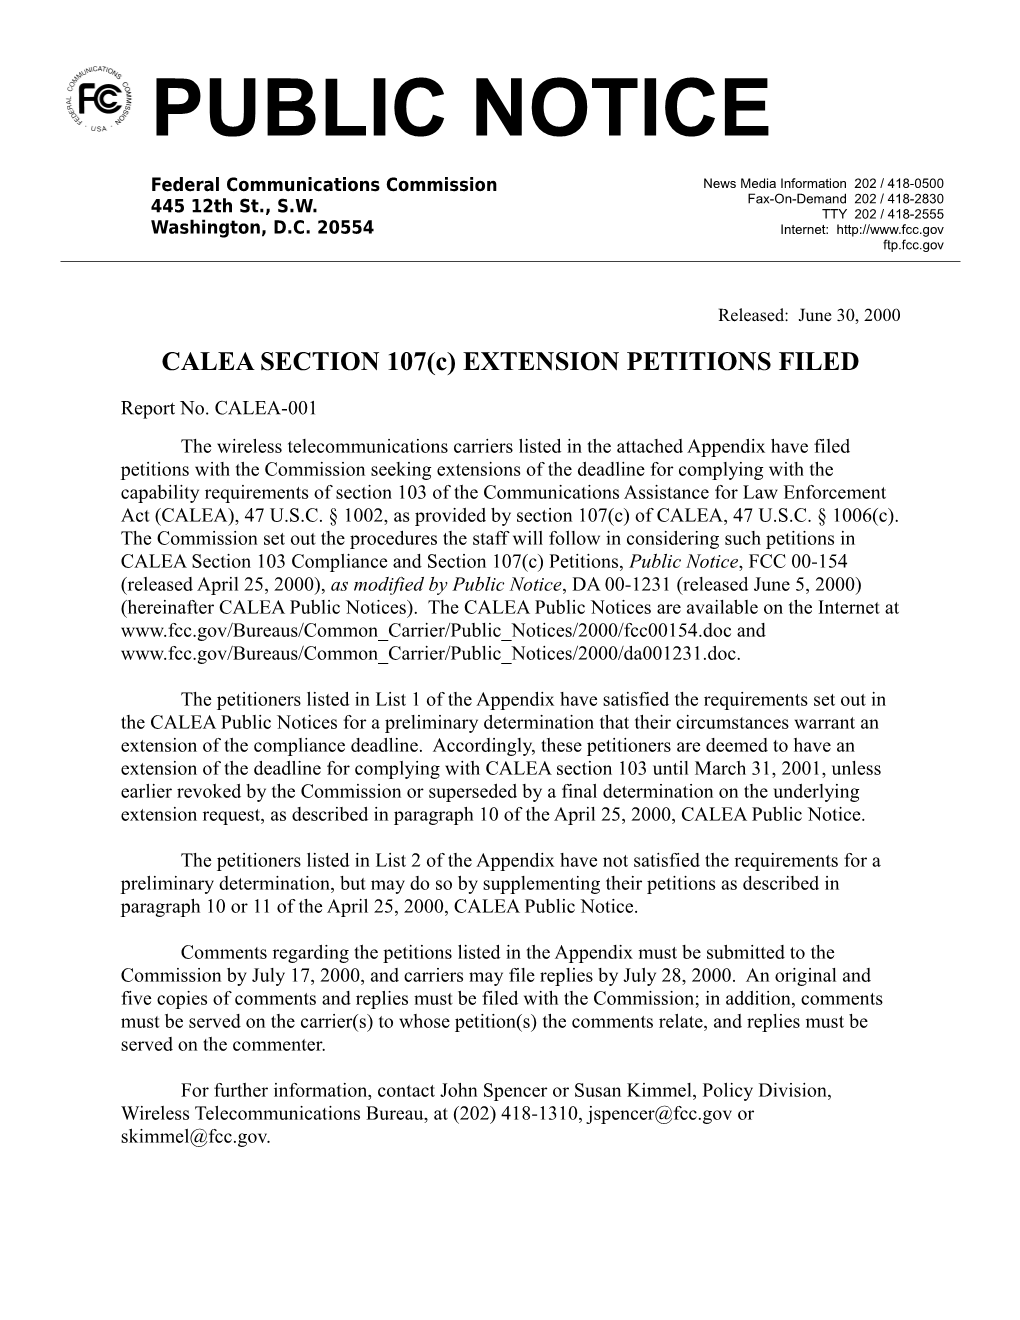 CALEA SECTION 107(C) EXTENSION PETITIONS FILED